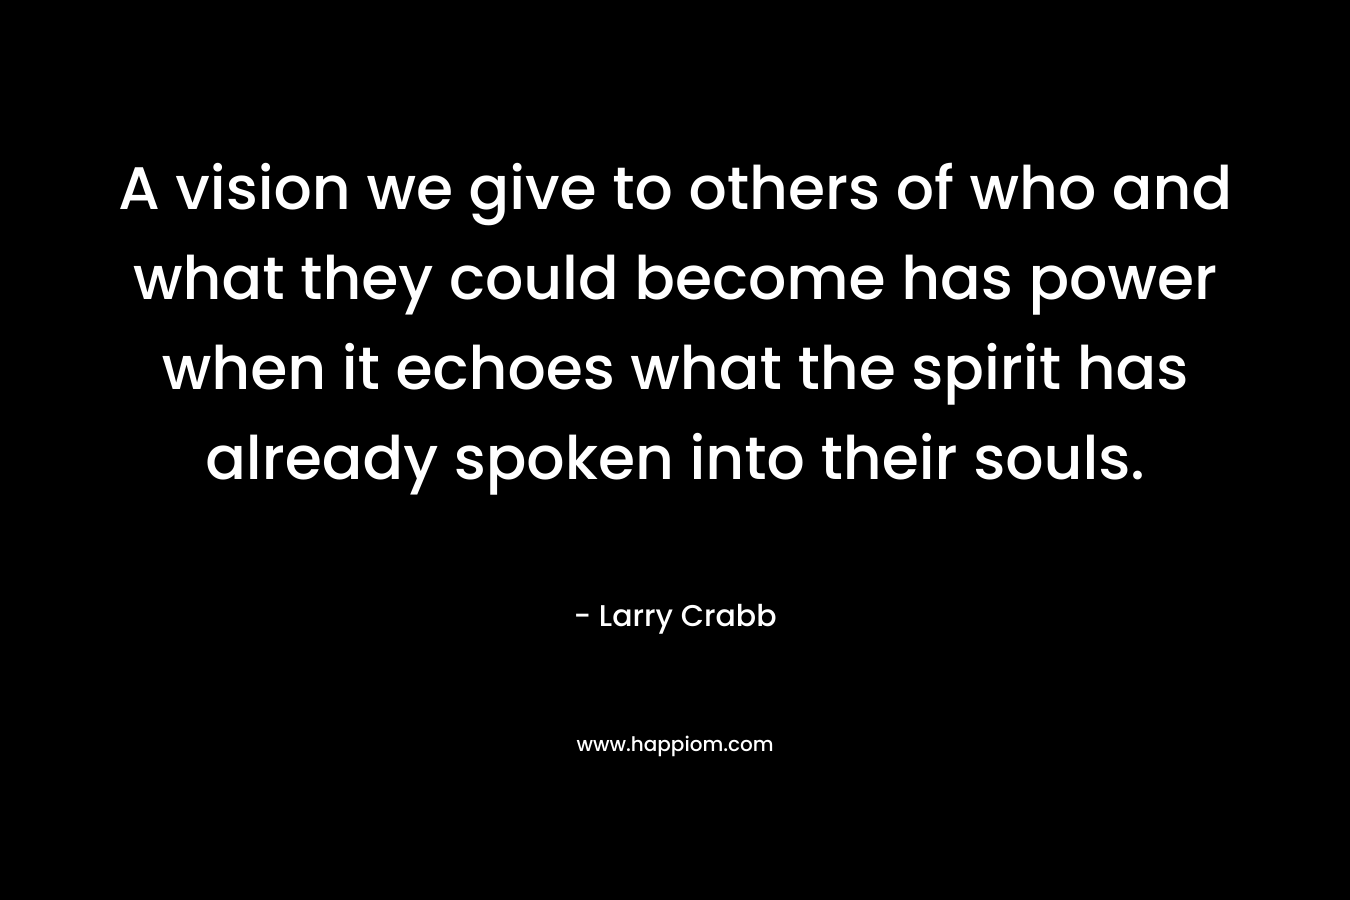 A vision we give to others of who and what they could become has power when it echoes what the spirit has already spoken into their souls. – Larry Crabb